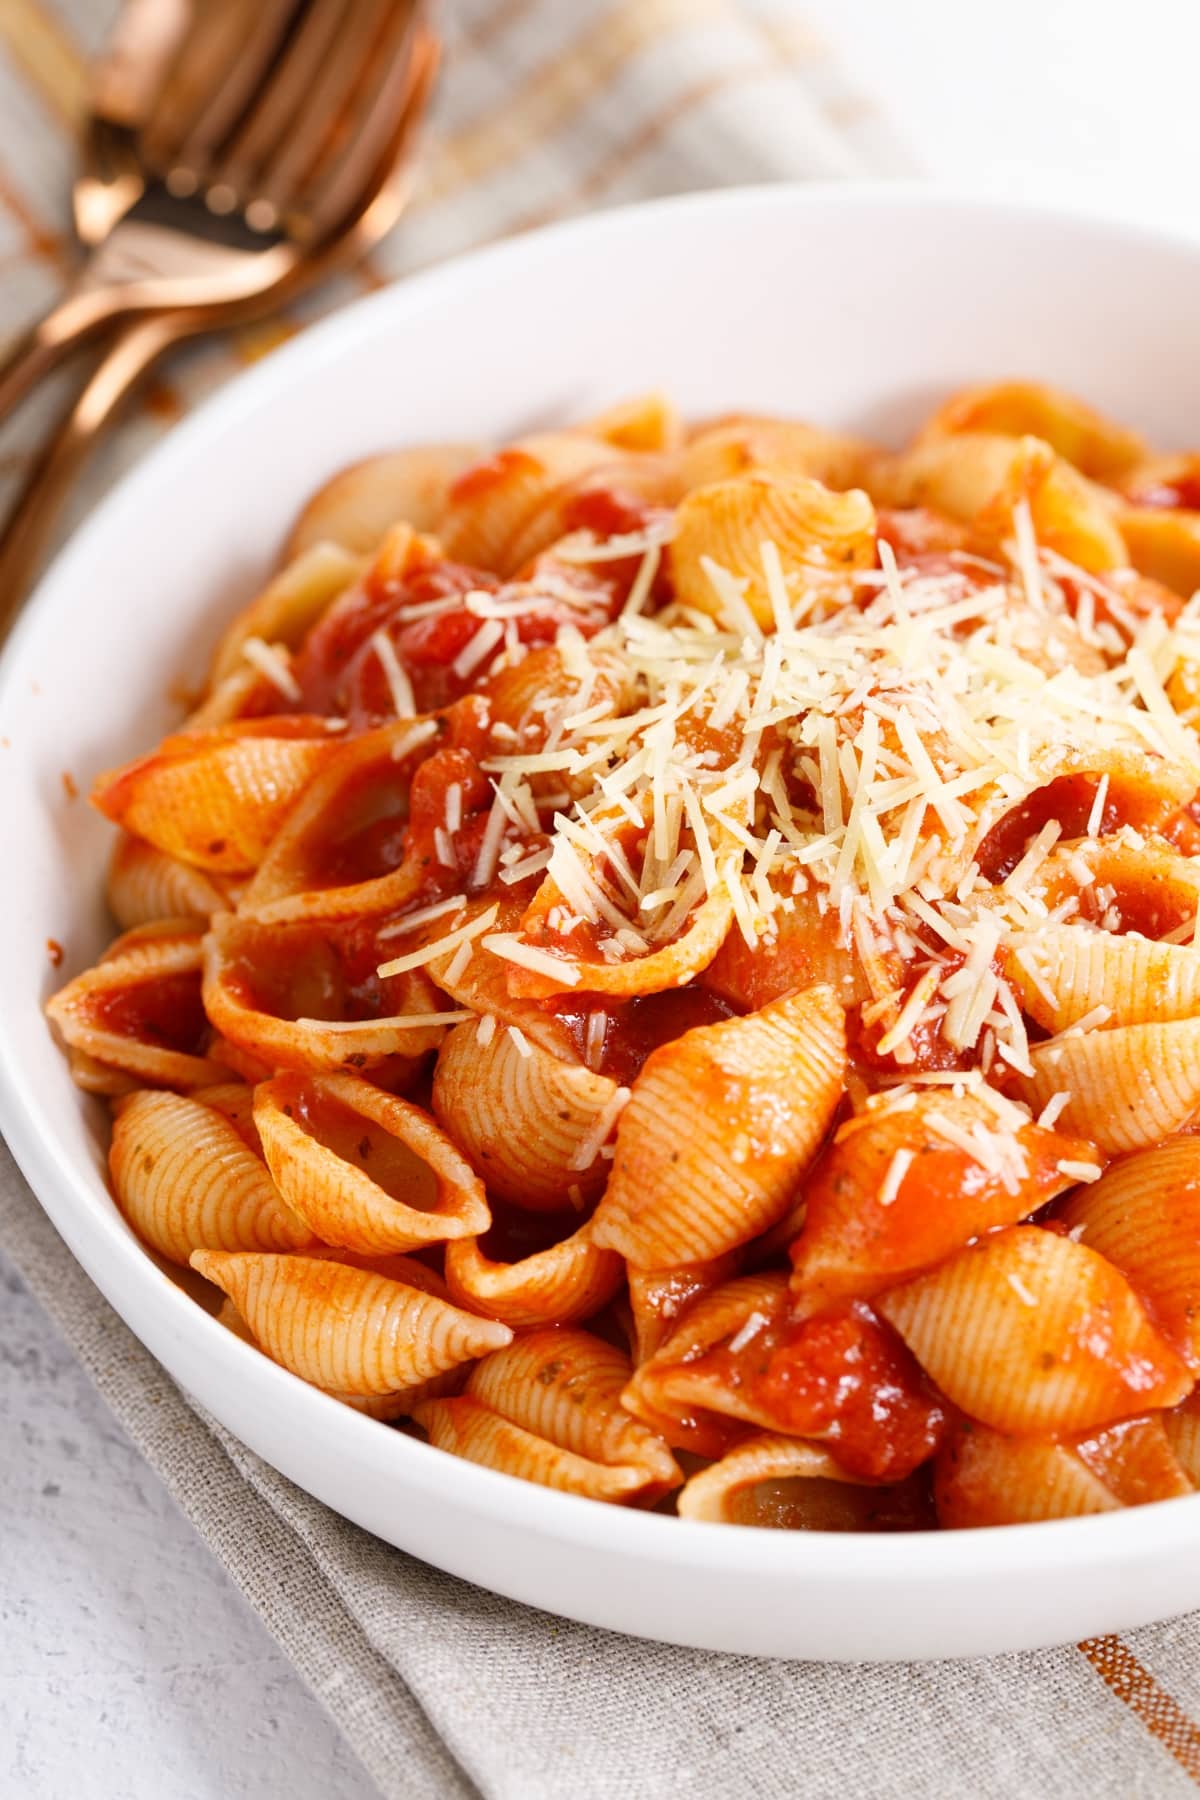 23 Top Celebrity Recipes You Need To Try featuring Homemade Pasta with Tomato Sauce and Shredded Cheese